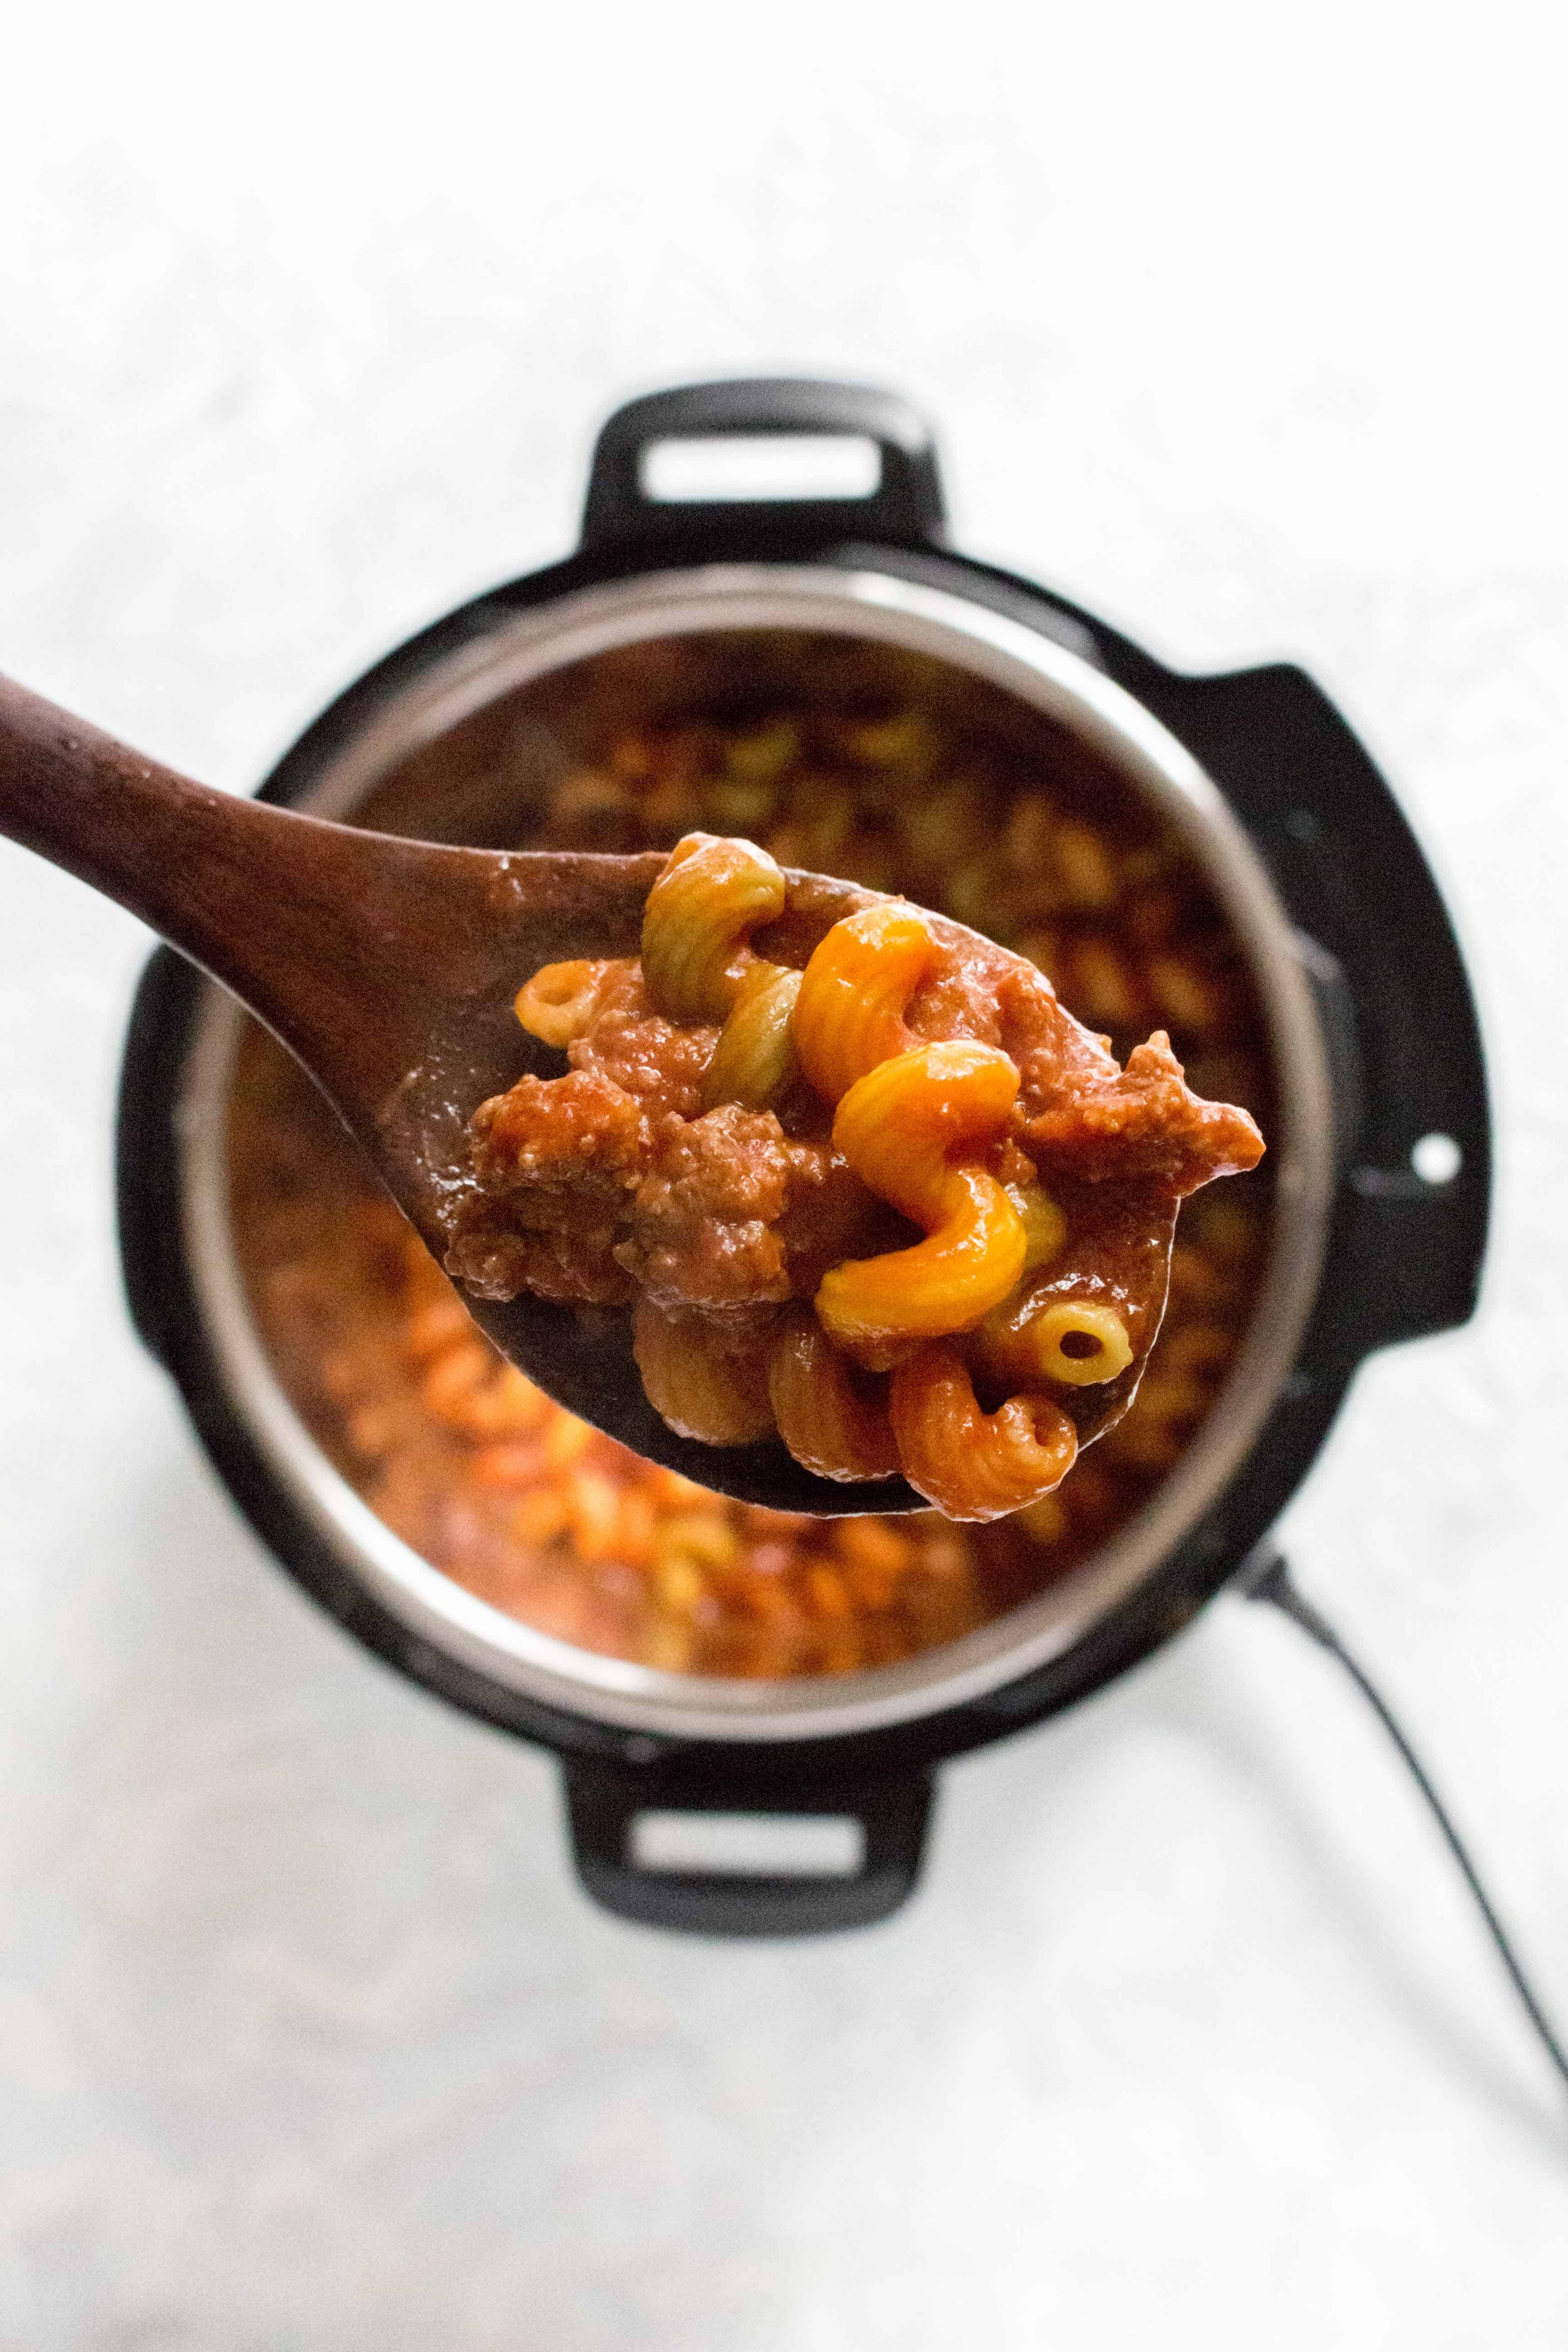 Ridiculously good, comforting, and delicious, this Instant Pot Beef and Pasta inspired by Beefaroni is going hit the spot!